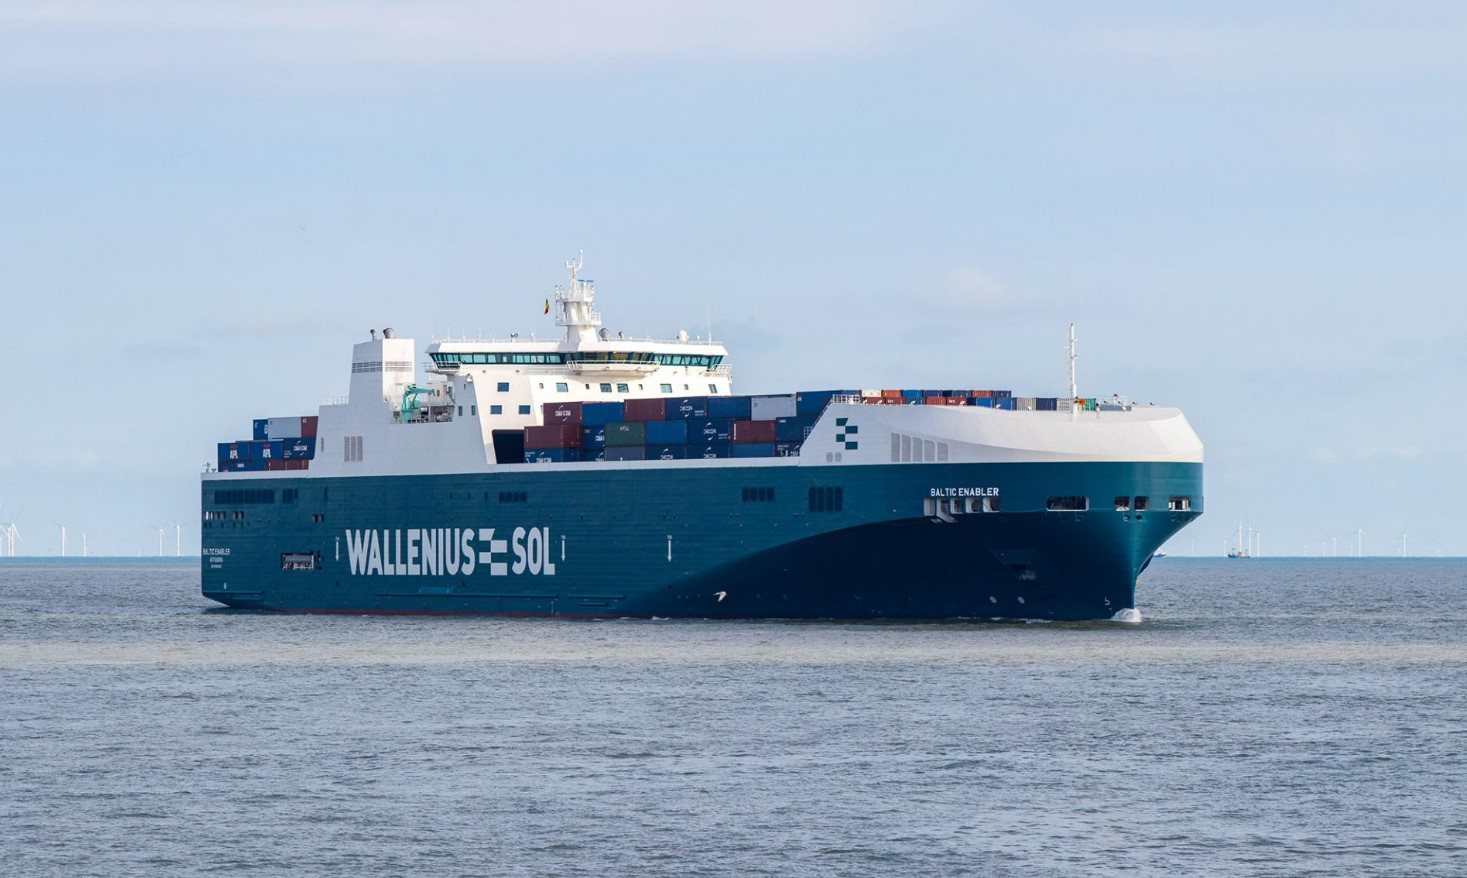 Wallenius SOL's second LNG-powered newbuild ready to enter service